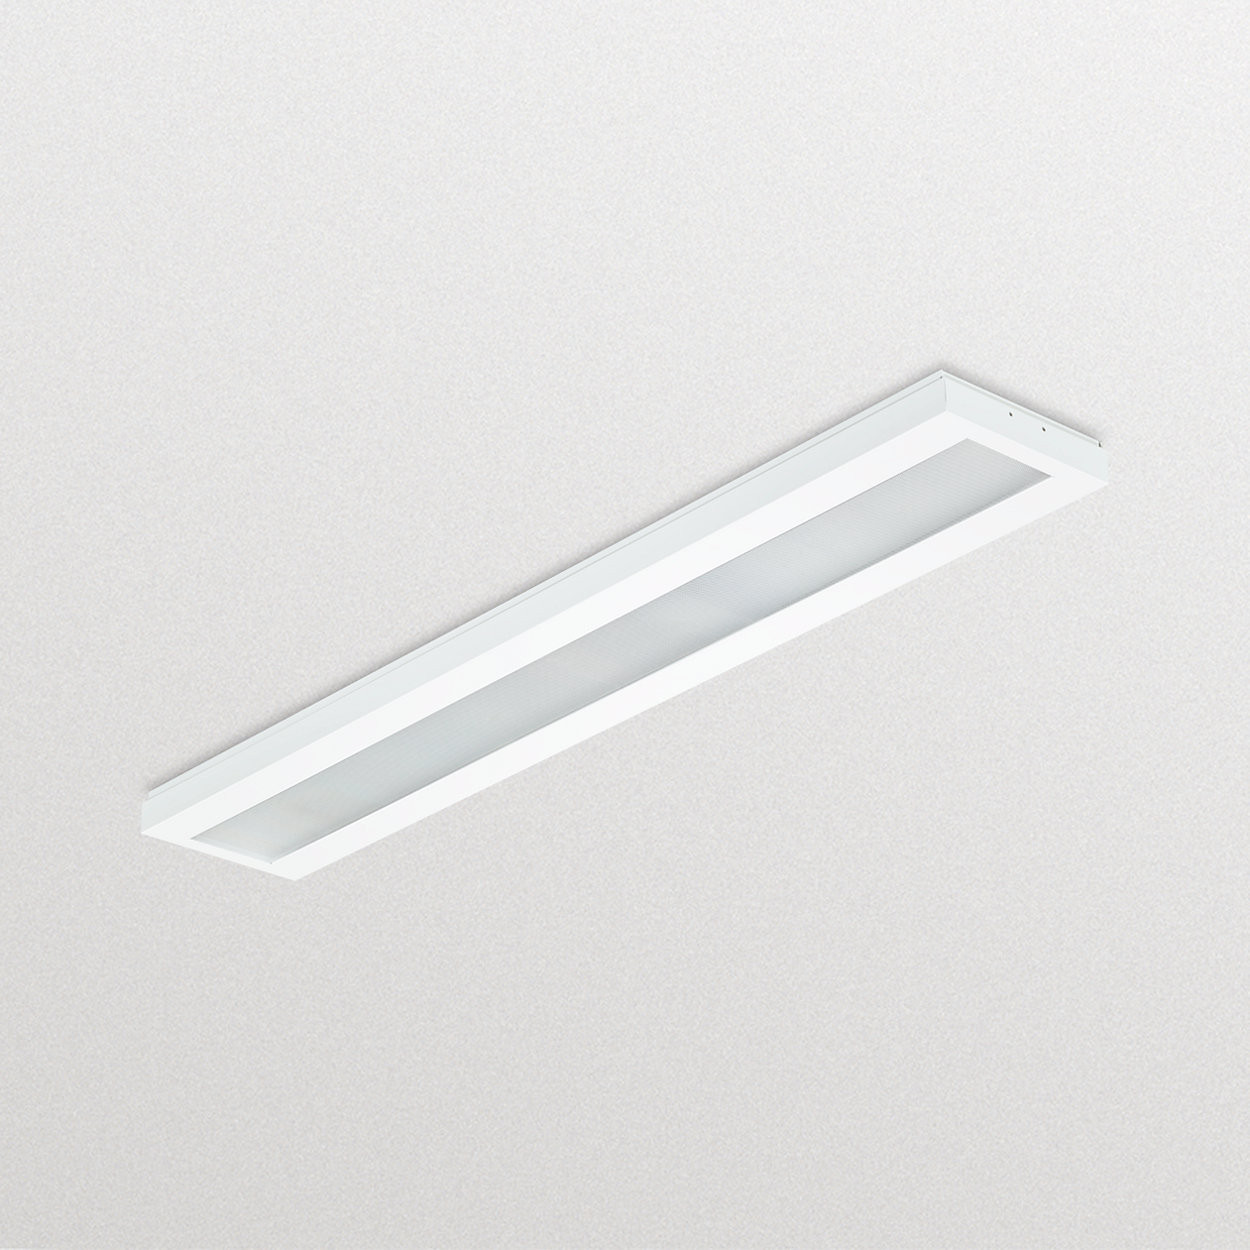 elbow Cereal Scholarship Philips SM134V LED27S/840 PSU W20L120 NOC - LED recessed light